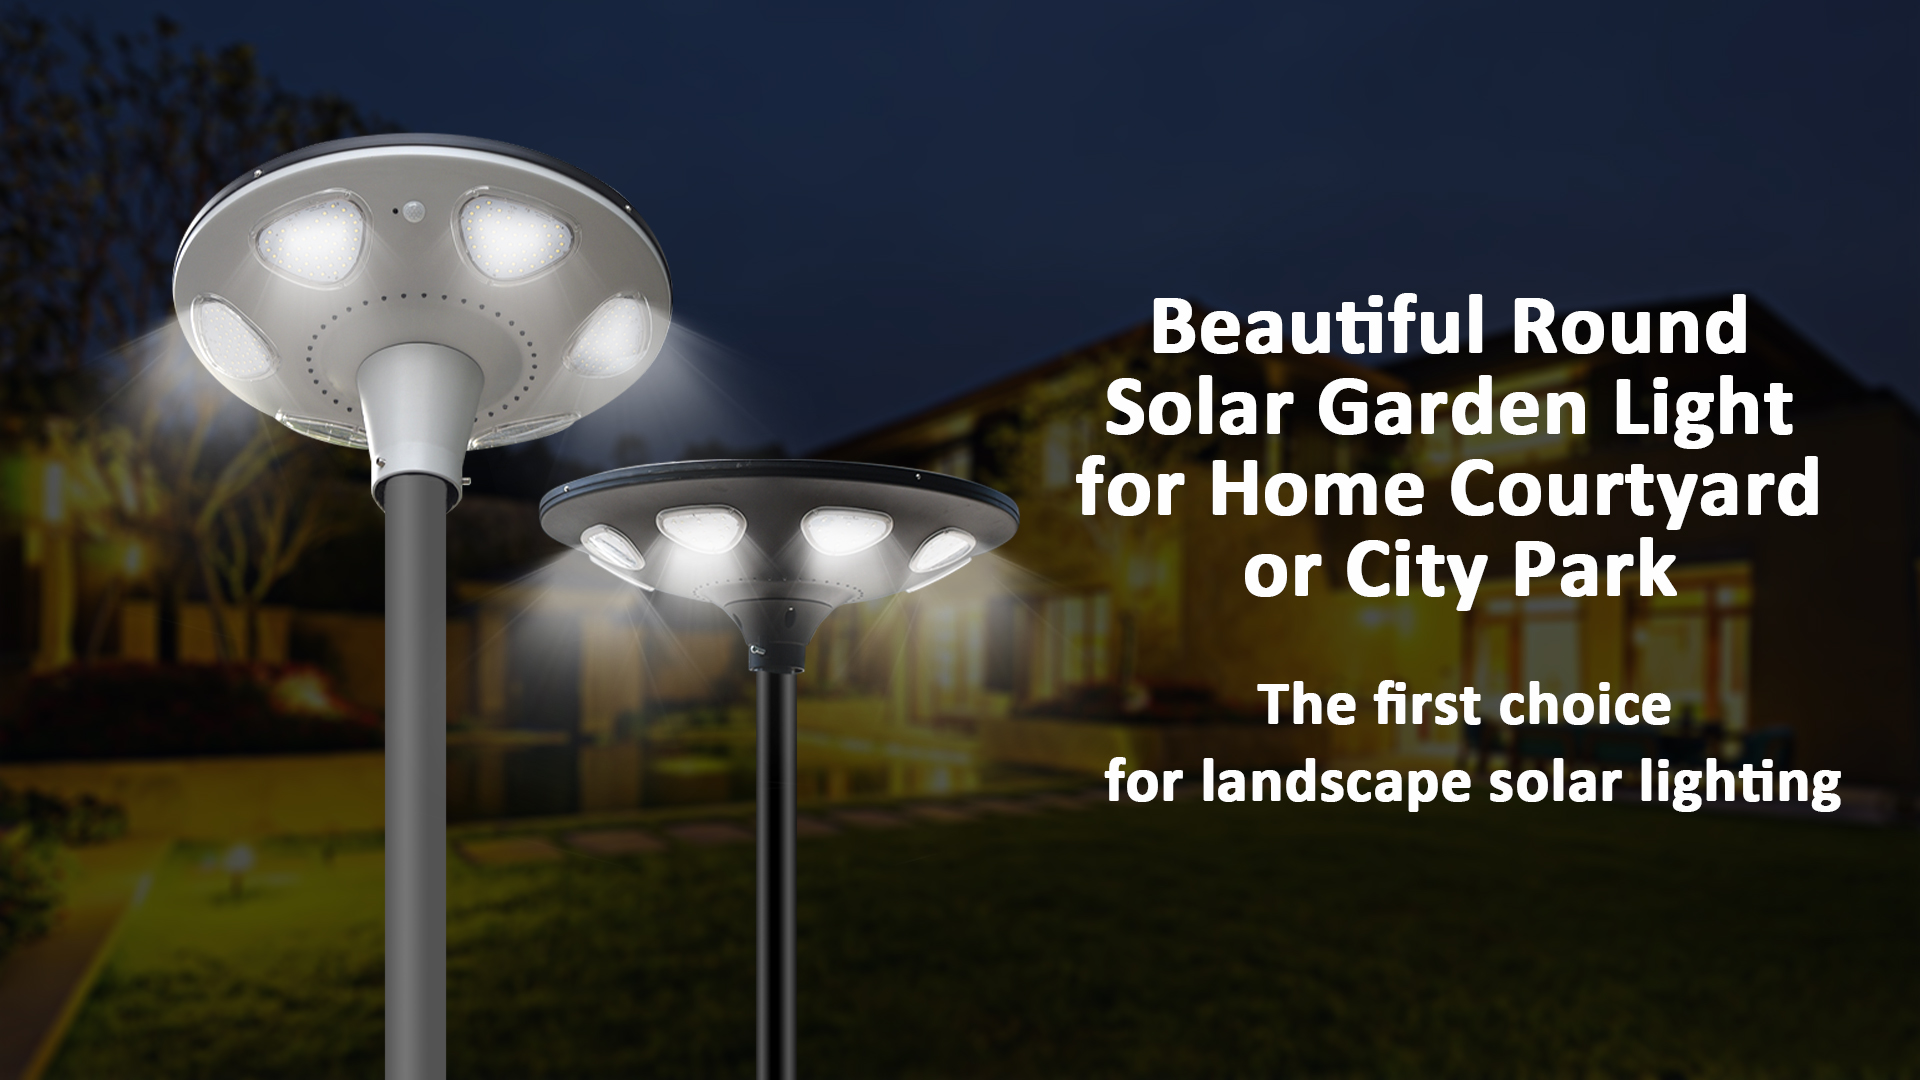 Beautiful Round Solar Garden Light for Home Courtyard or City Park